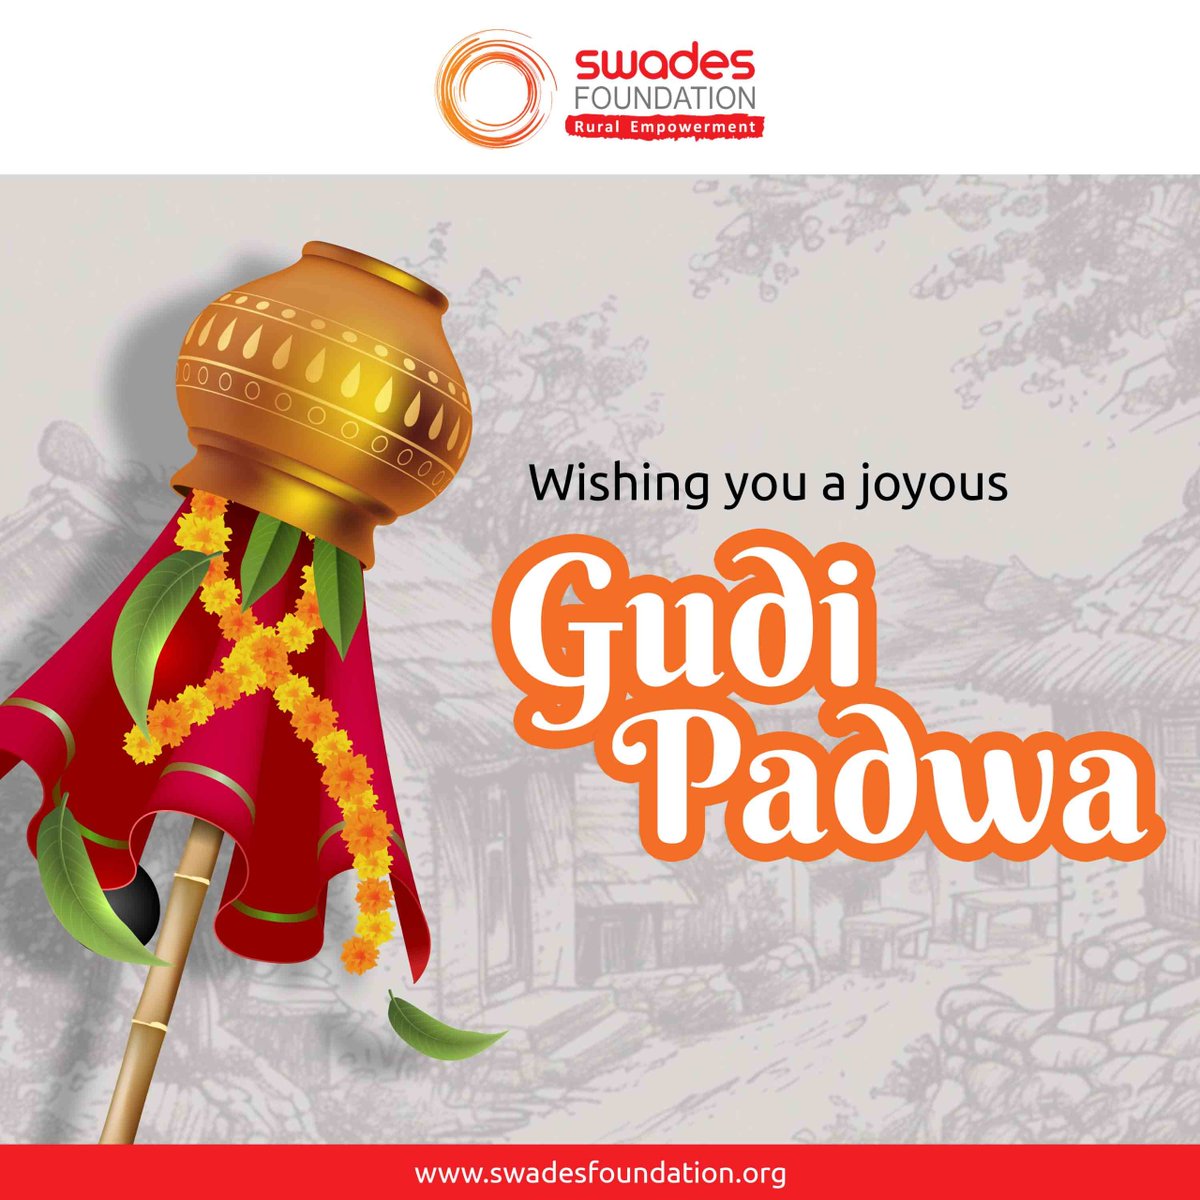 Wishing everyone a happy and prosperous Gudi Padwa! May this year bring with it lots of opportunity, good fortune and boundless joy. #gudipadwa #newbeginnings #festival #celebration #indianfestival #wishing